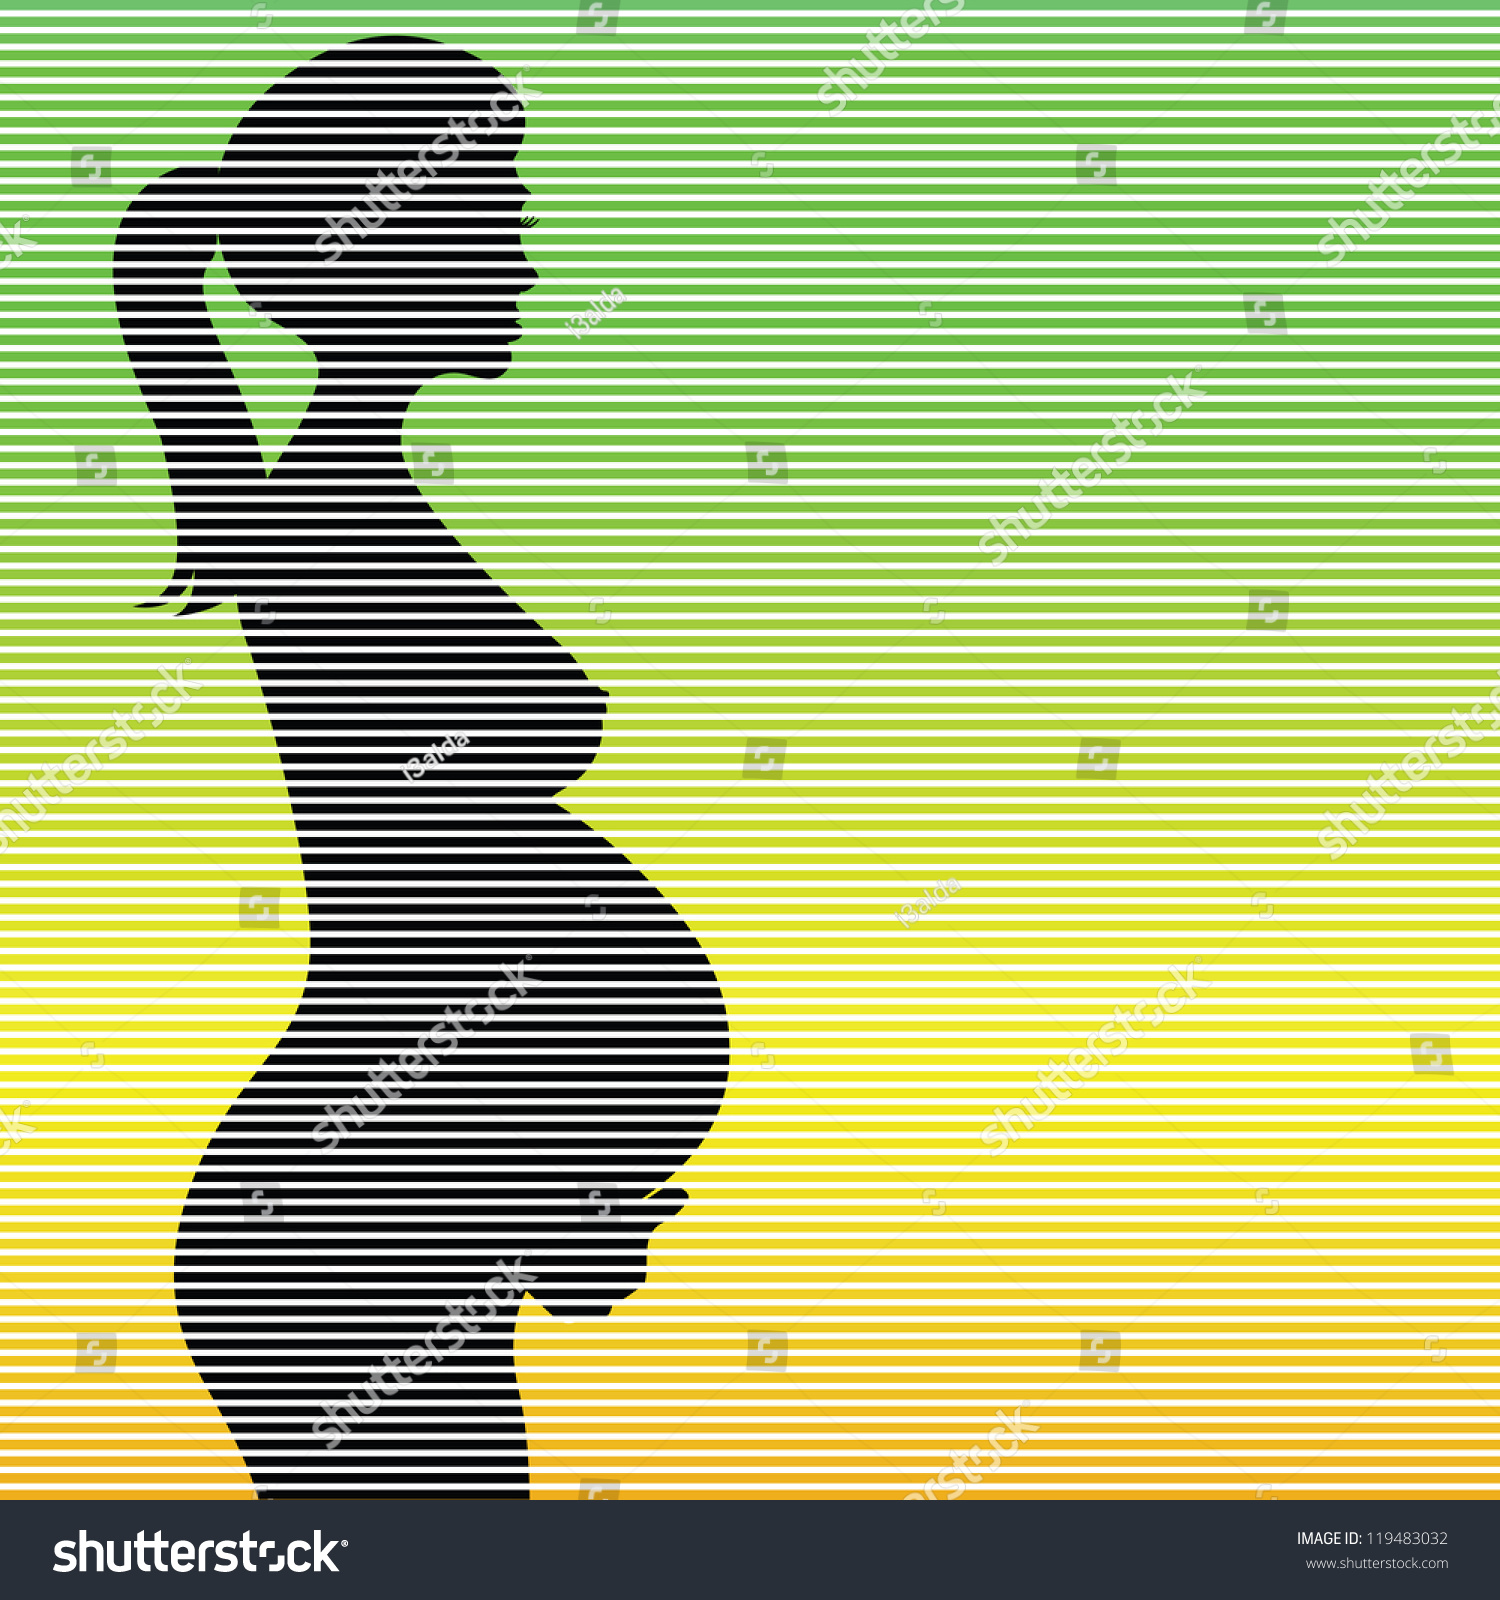 Pregnant Naked Woman Silhouette Illustration Stock Vector Royalty Free 119483032